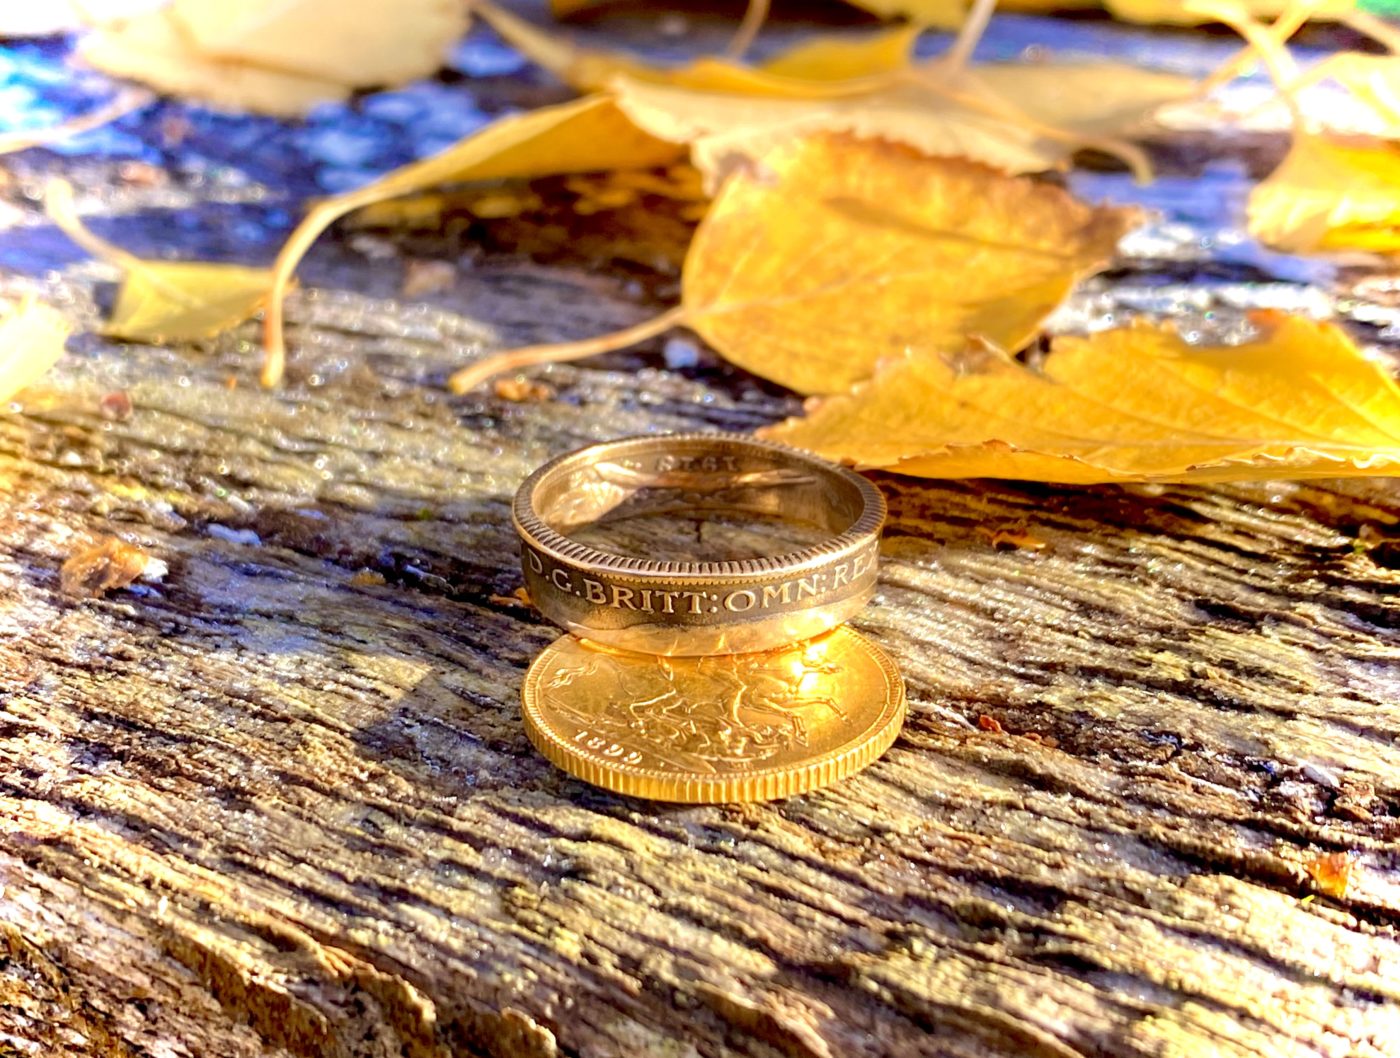 Handcrafted and upcycled 22ct gold coin wedding rings